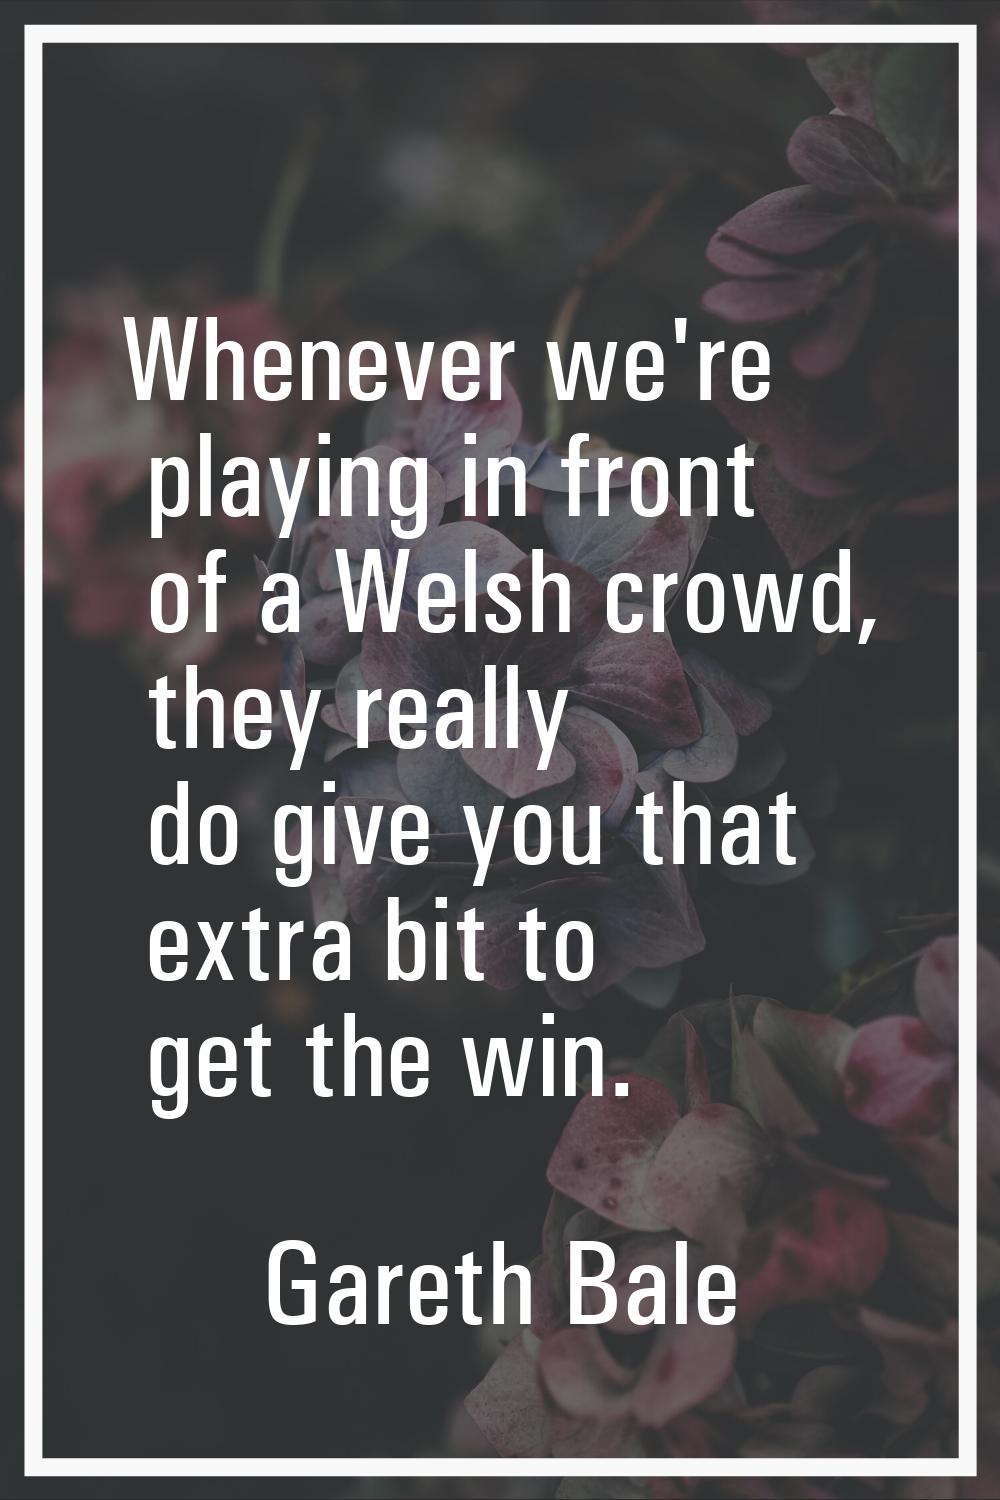 Whenever we're playing in front of a Welsh crowd, they really do give you that extra bit to get the